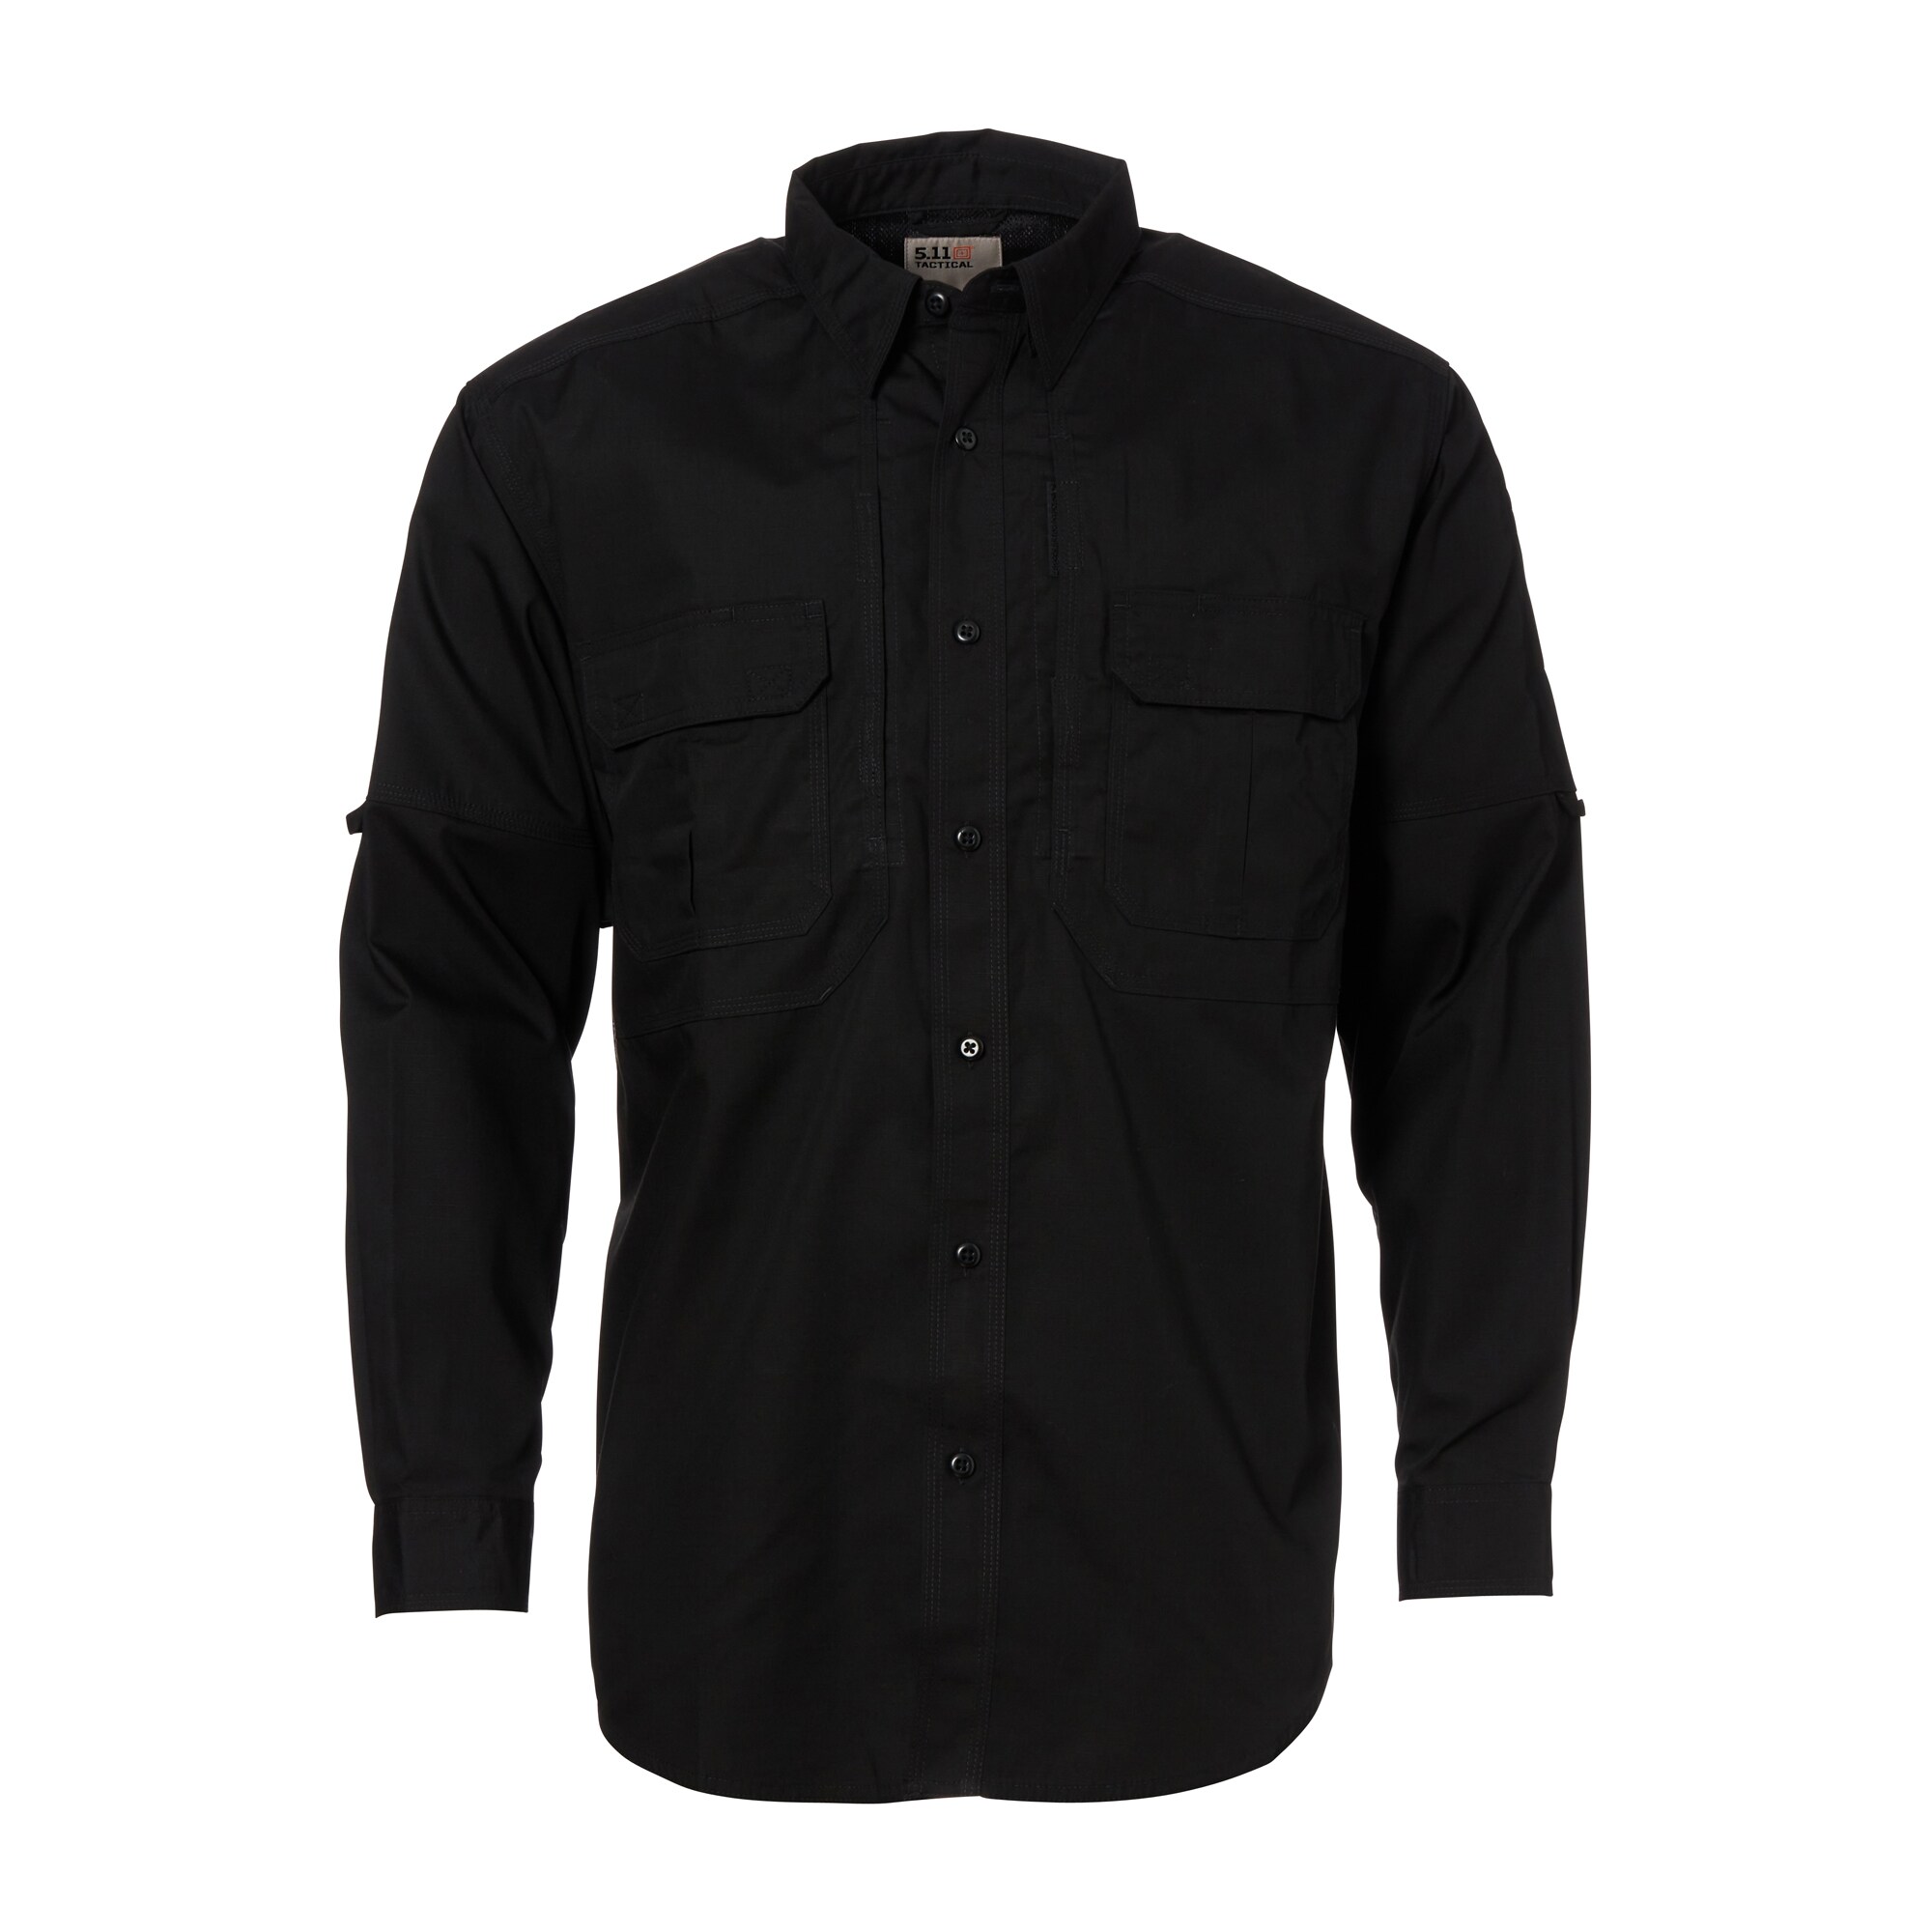 Purchase the 5.11 Taclite Pro Shirt Long Sleeved black by ASMC